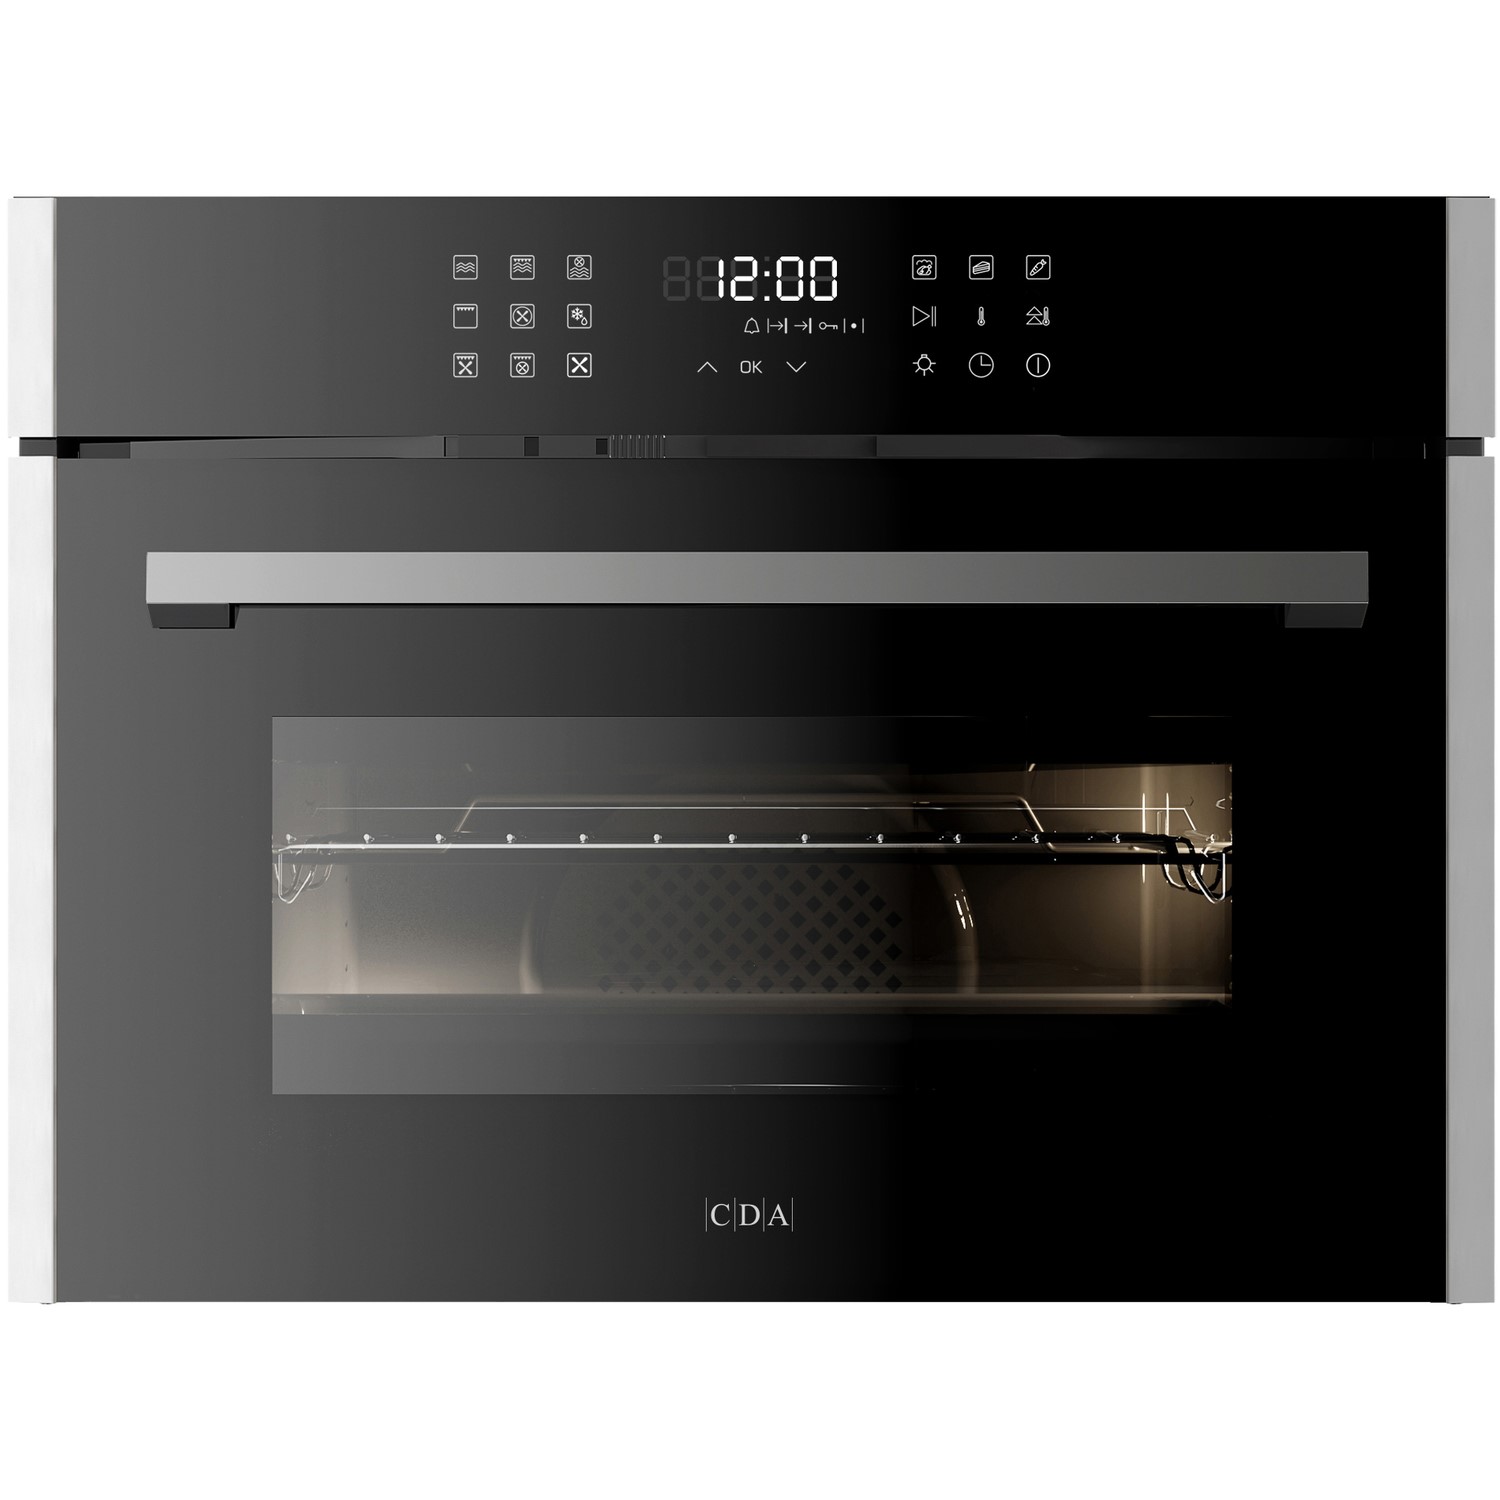 CDA 40L Compact Built-in Combination Microwave Oven - Stainless Steel